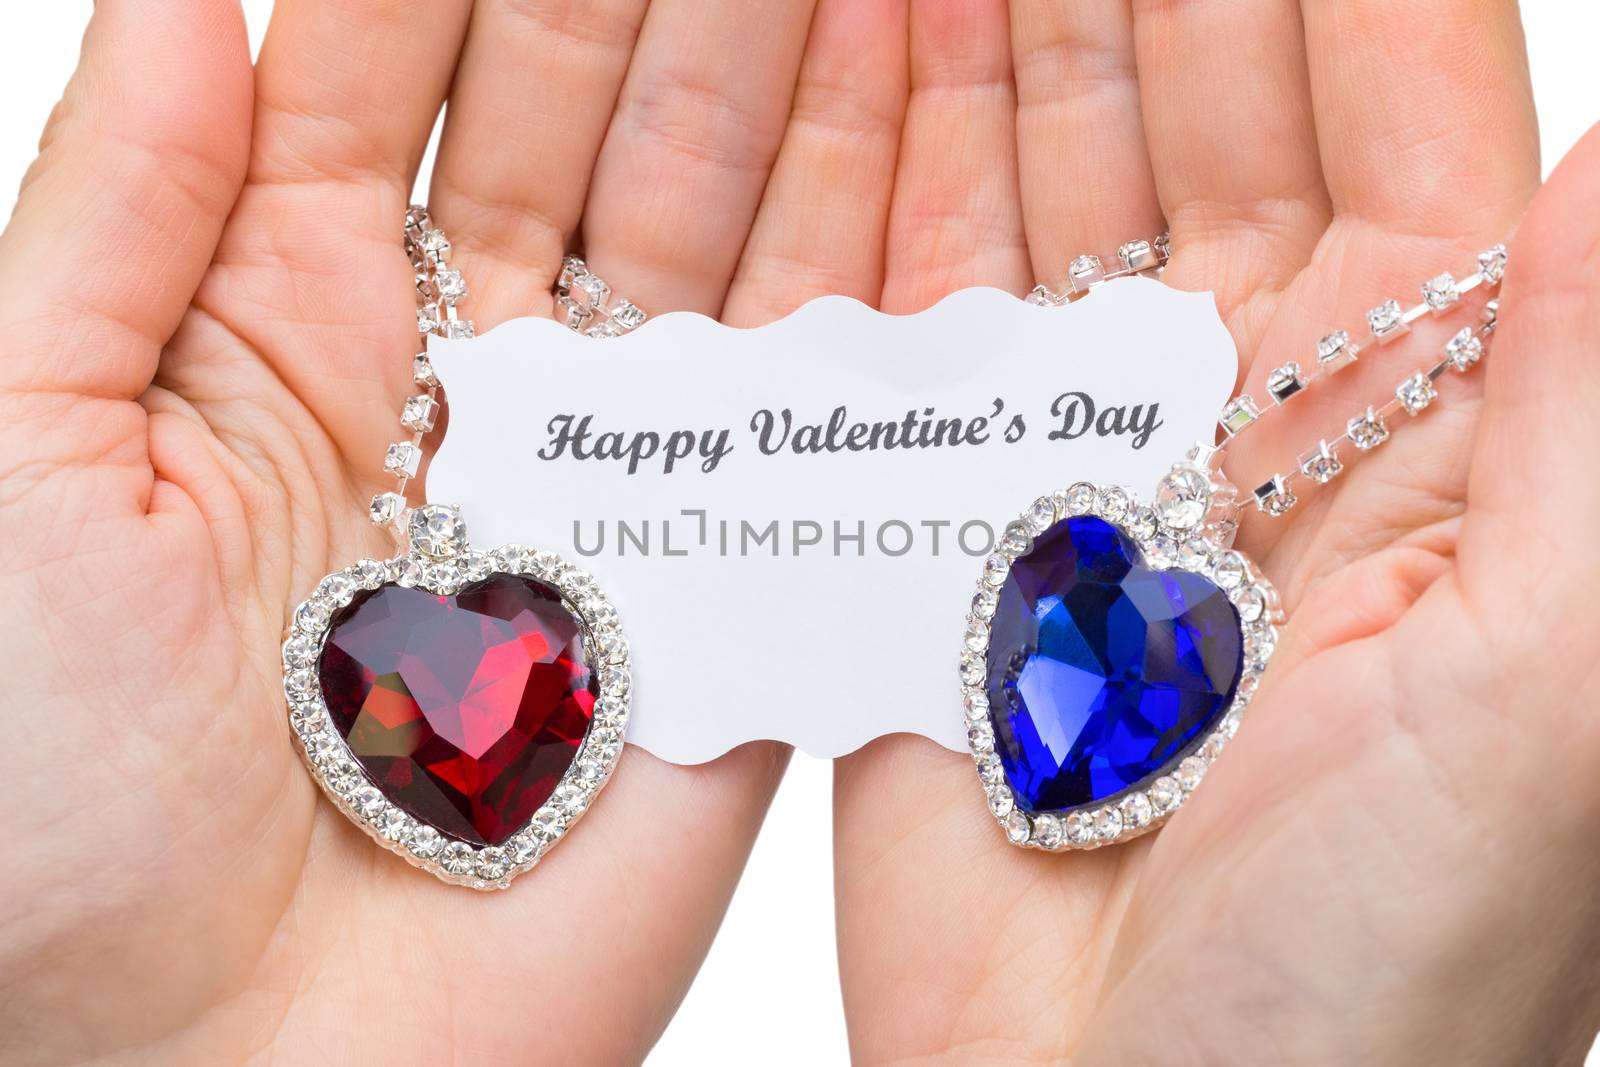 Red and blue jewelry hearts with message on  valentine card shown on two hands